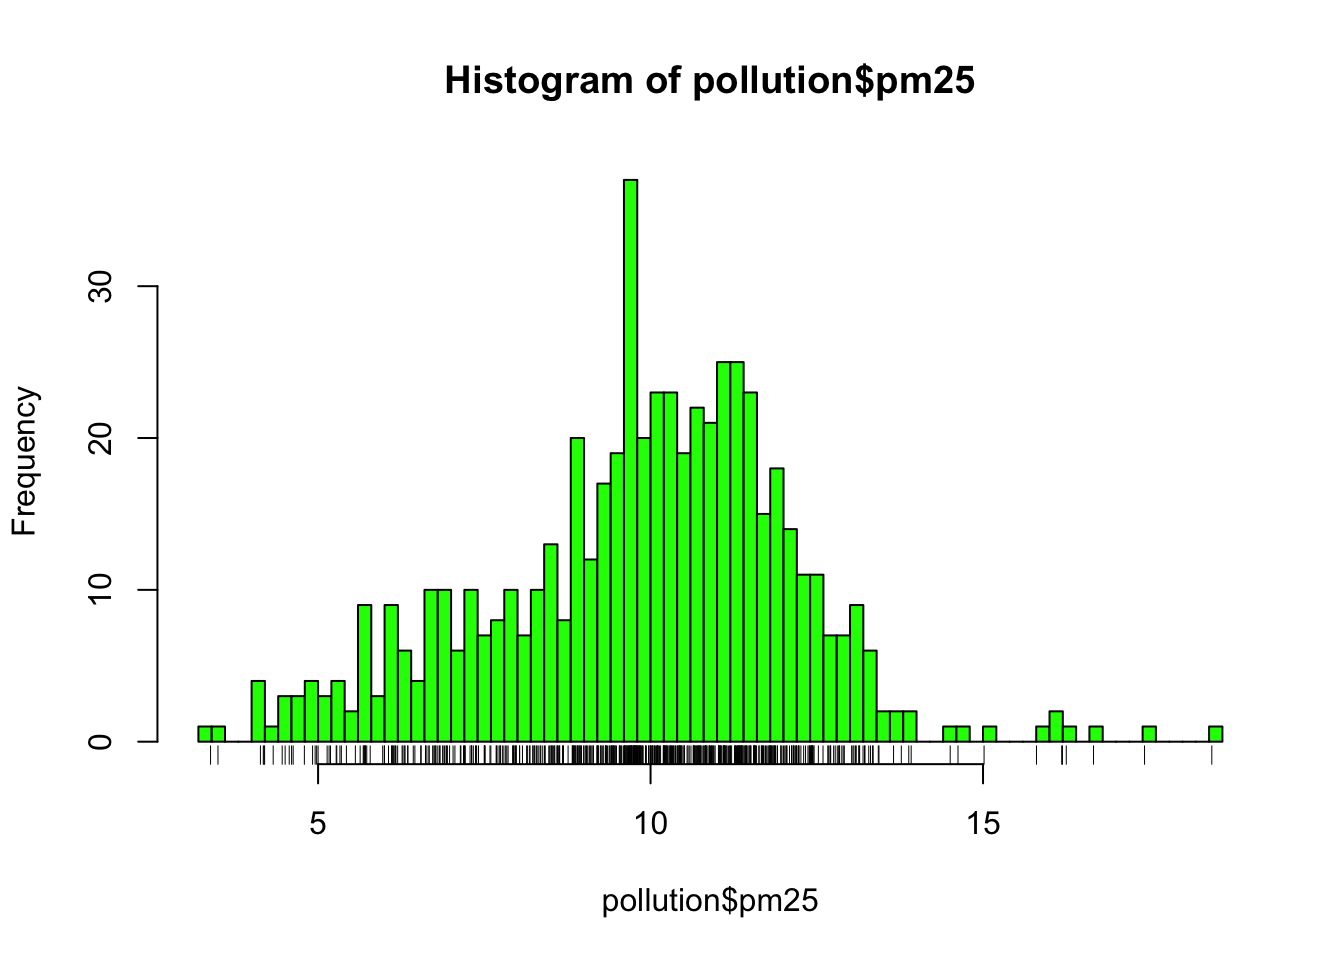 Histogram of PM2.5 data with more breaks